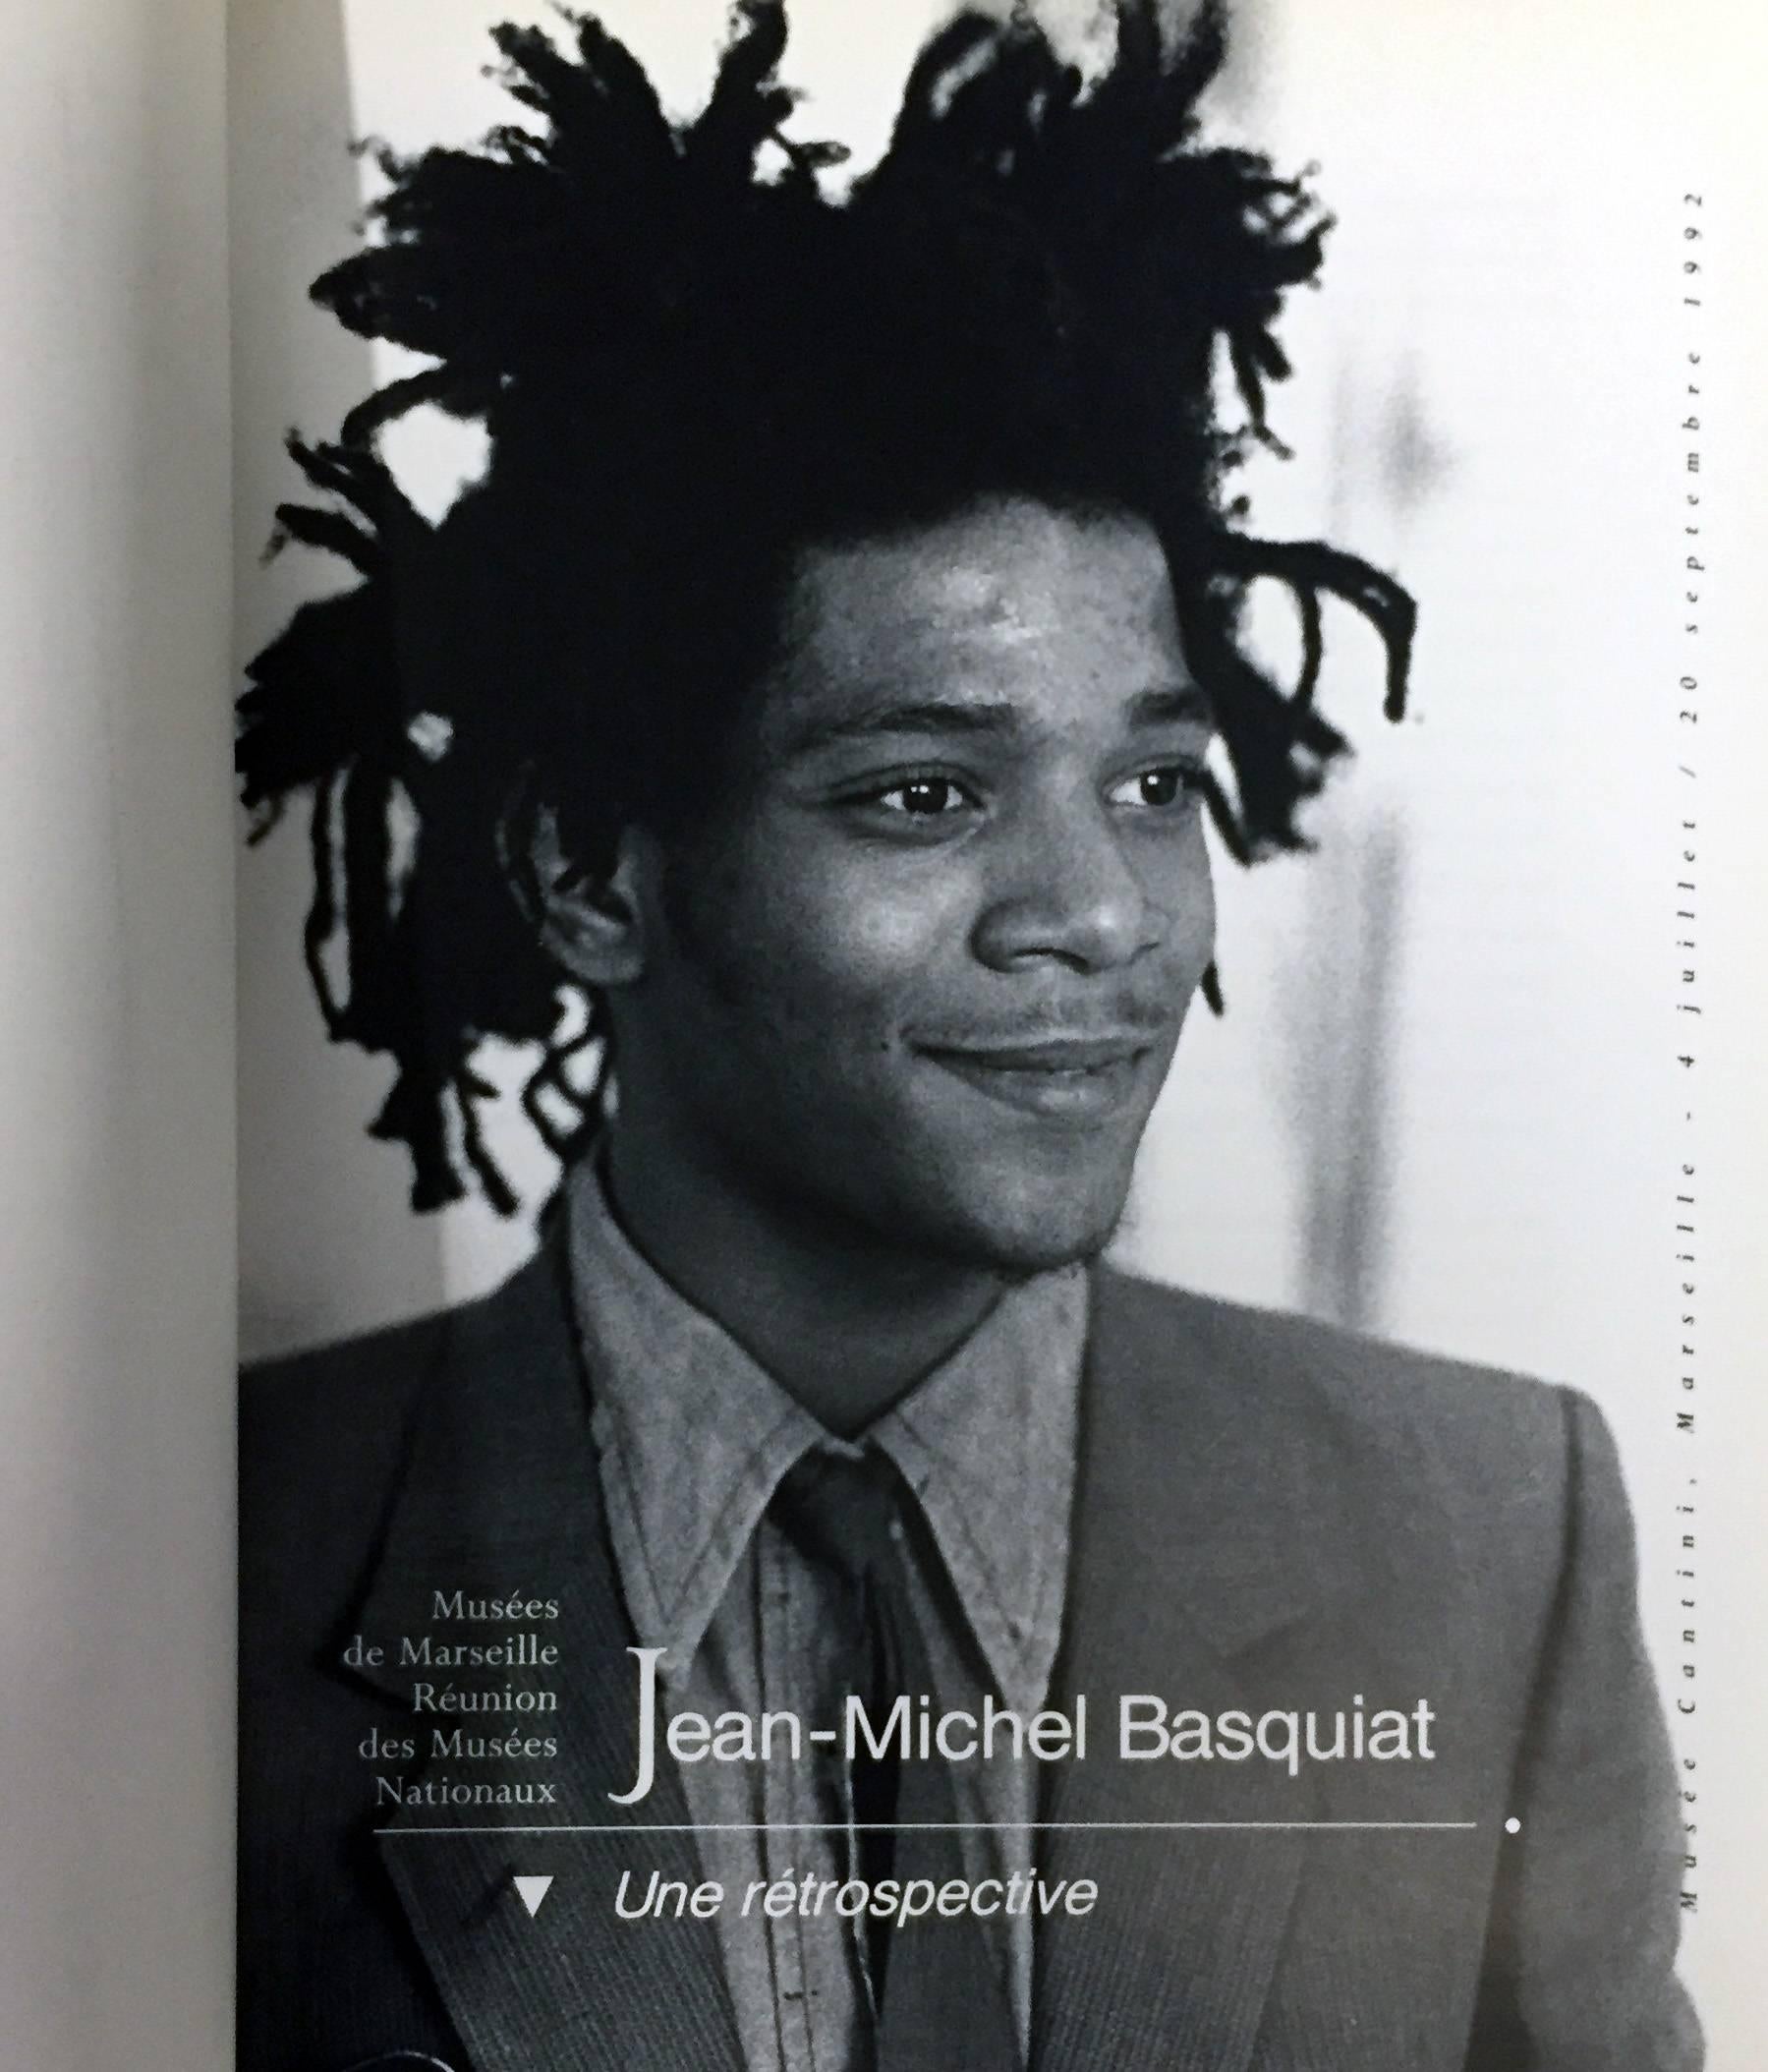 Original Exhibition Catalog, for Jean-Michel Basquiat – A Retrospective; Musée Cantini, Marseille, France, 1992

Illustrated cover with flaps, 192 pages; approx 10 x 12 inches (30 x 23 cm)
Approximately 65 color reproductions plus some rare photos